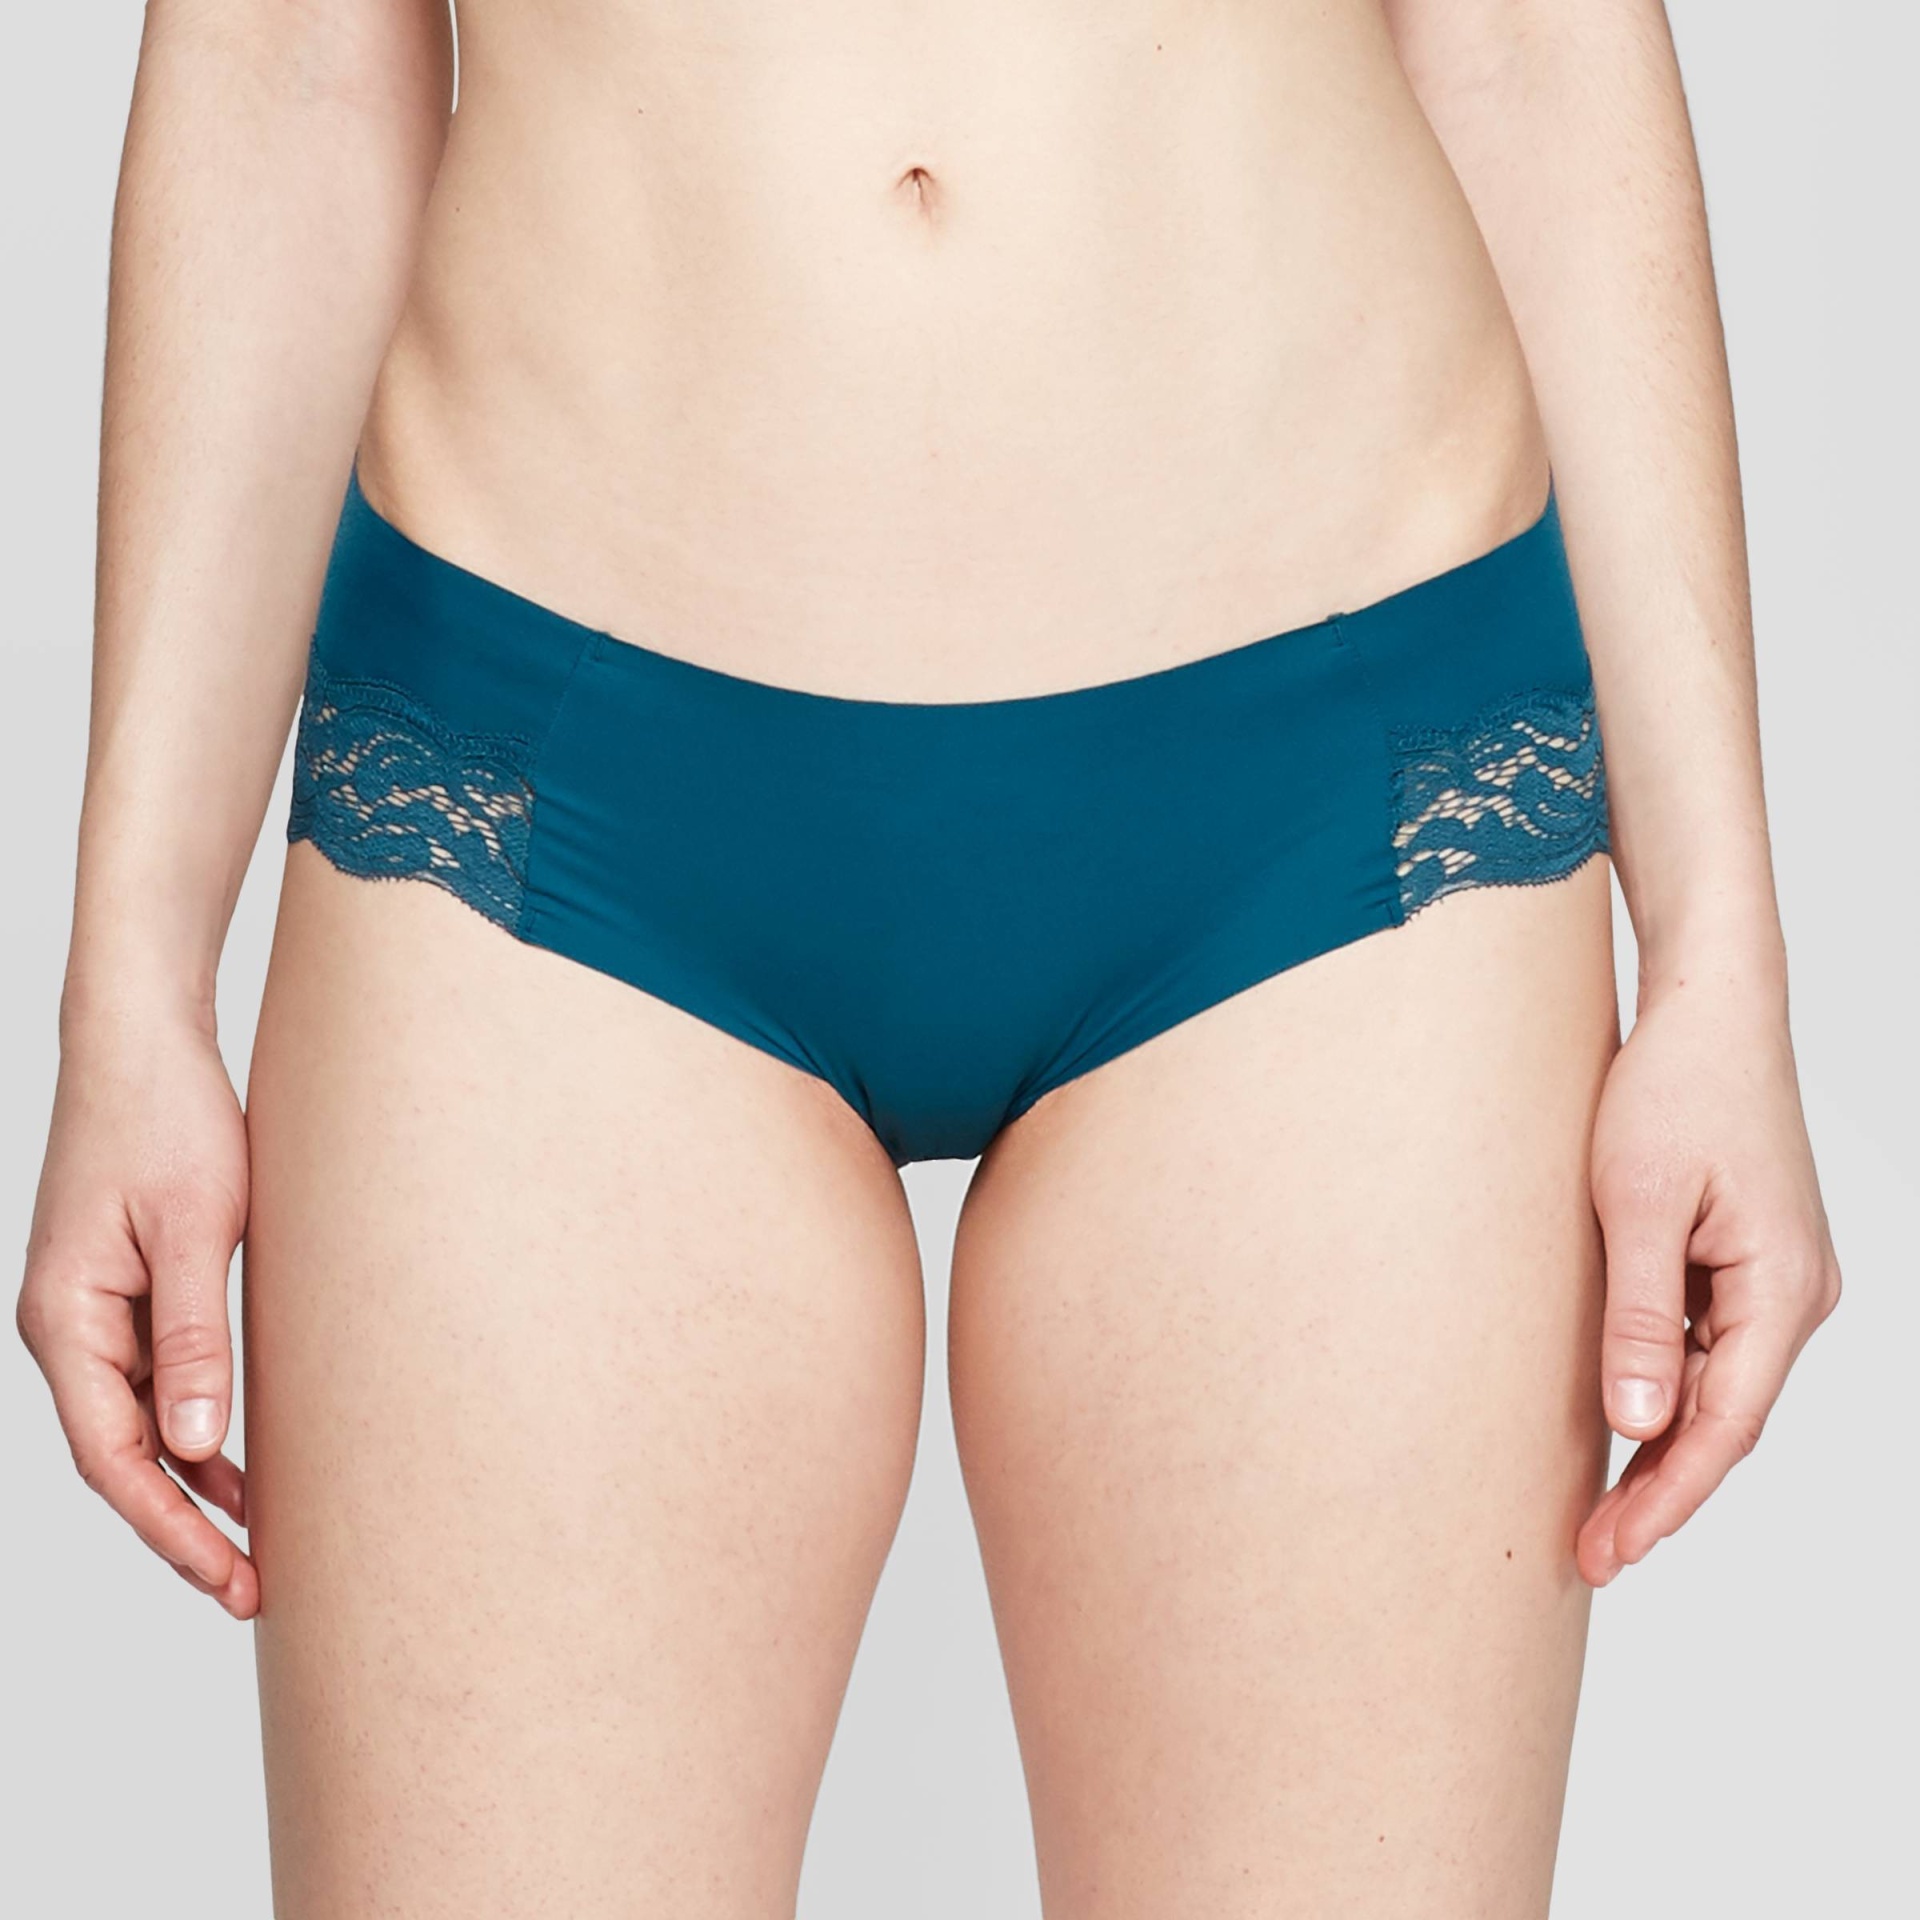 Women's Laser Cut Cheeky Underwear with Lace - Auden English Teal XS 1 ct